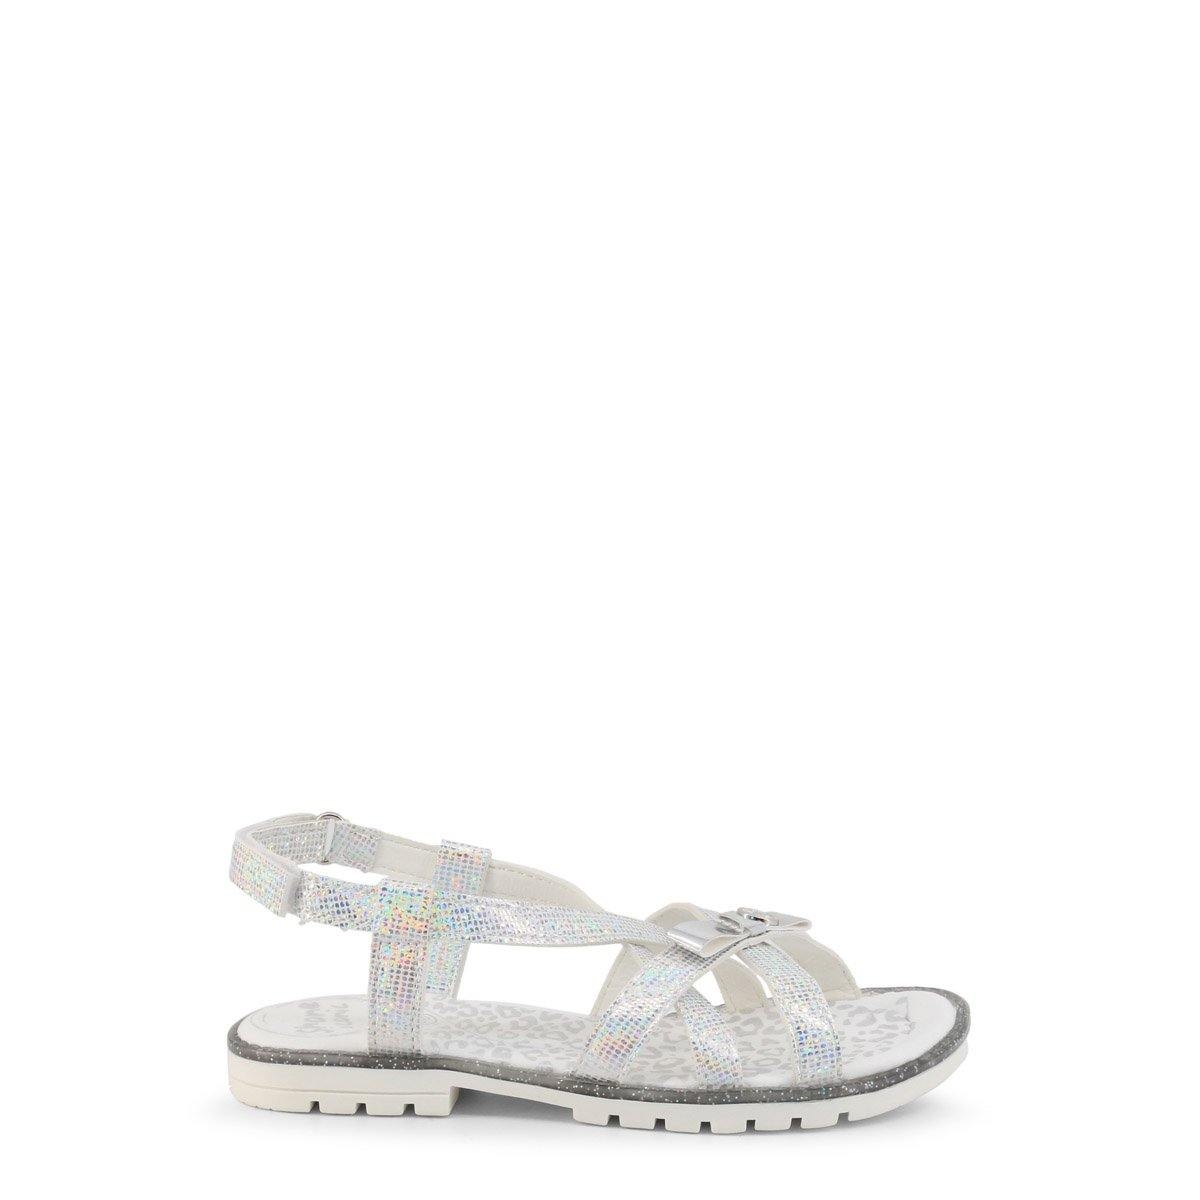 Shone – Kids sandals with glitter detail in pink or grey – 19057-001 – grey – EU 24